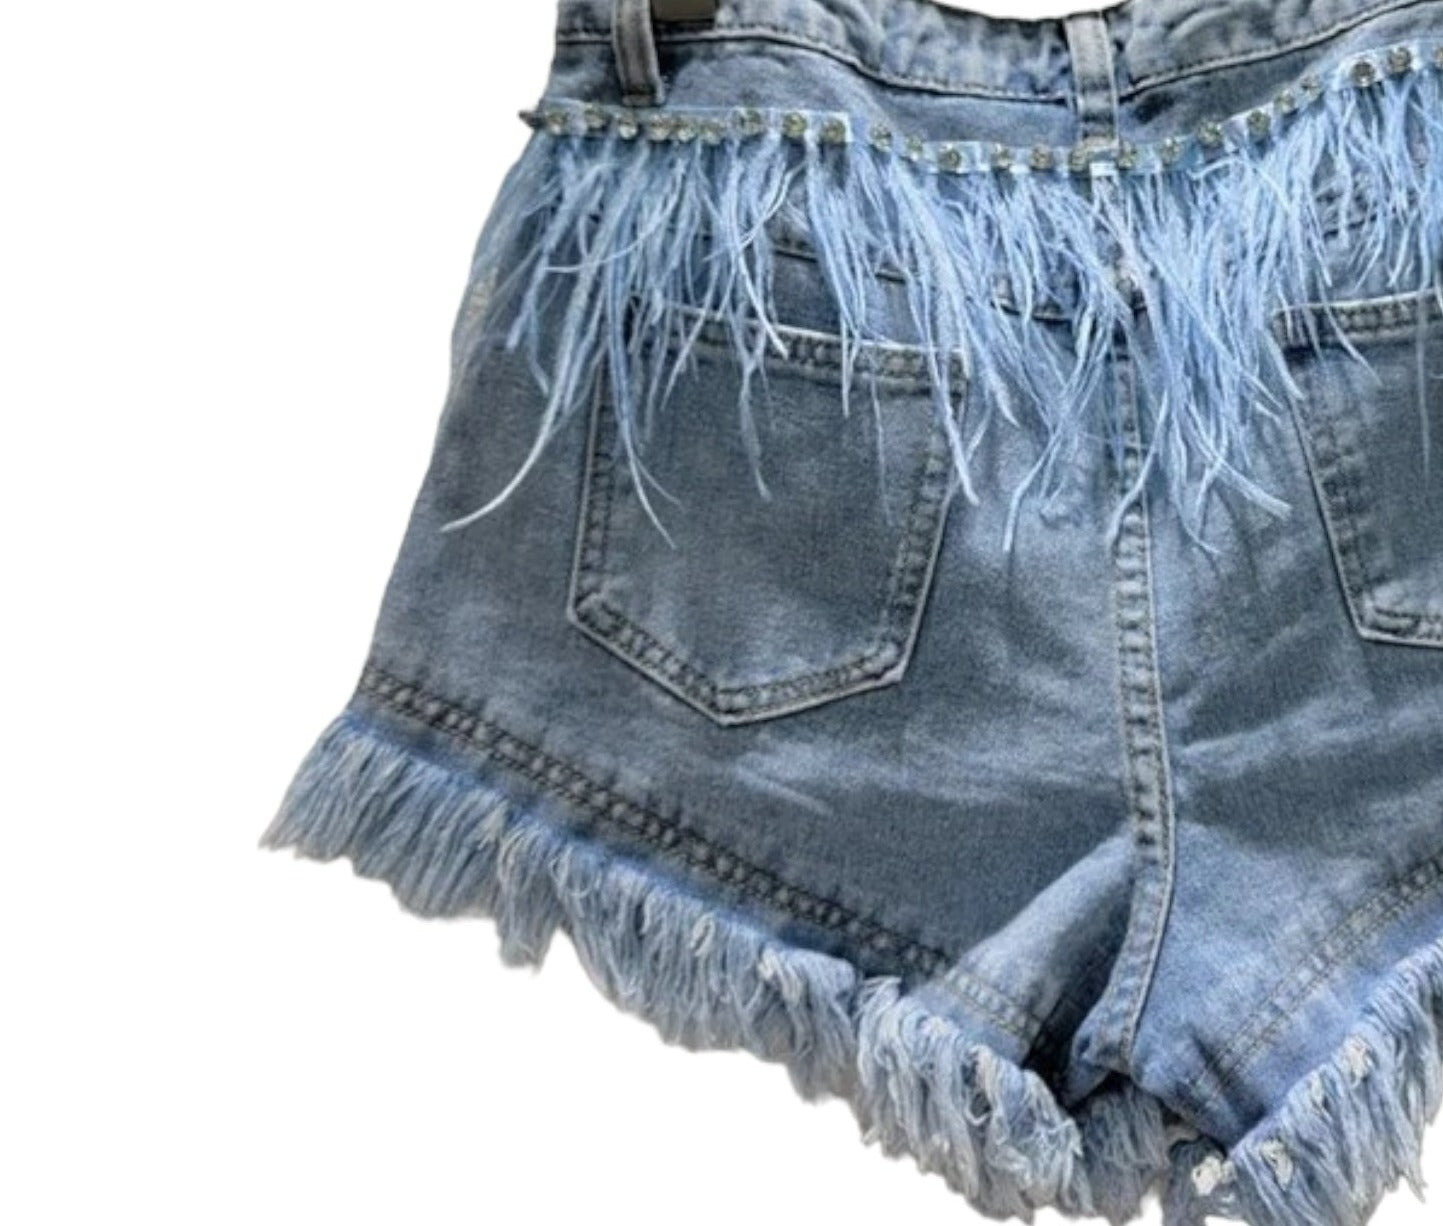 No Strings Attached Denim Feathered Shorts - 